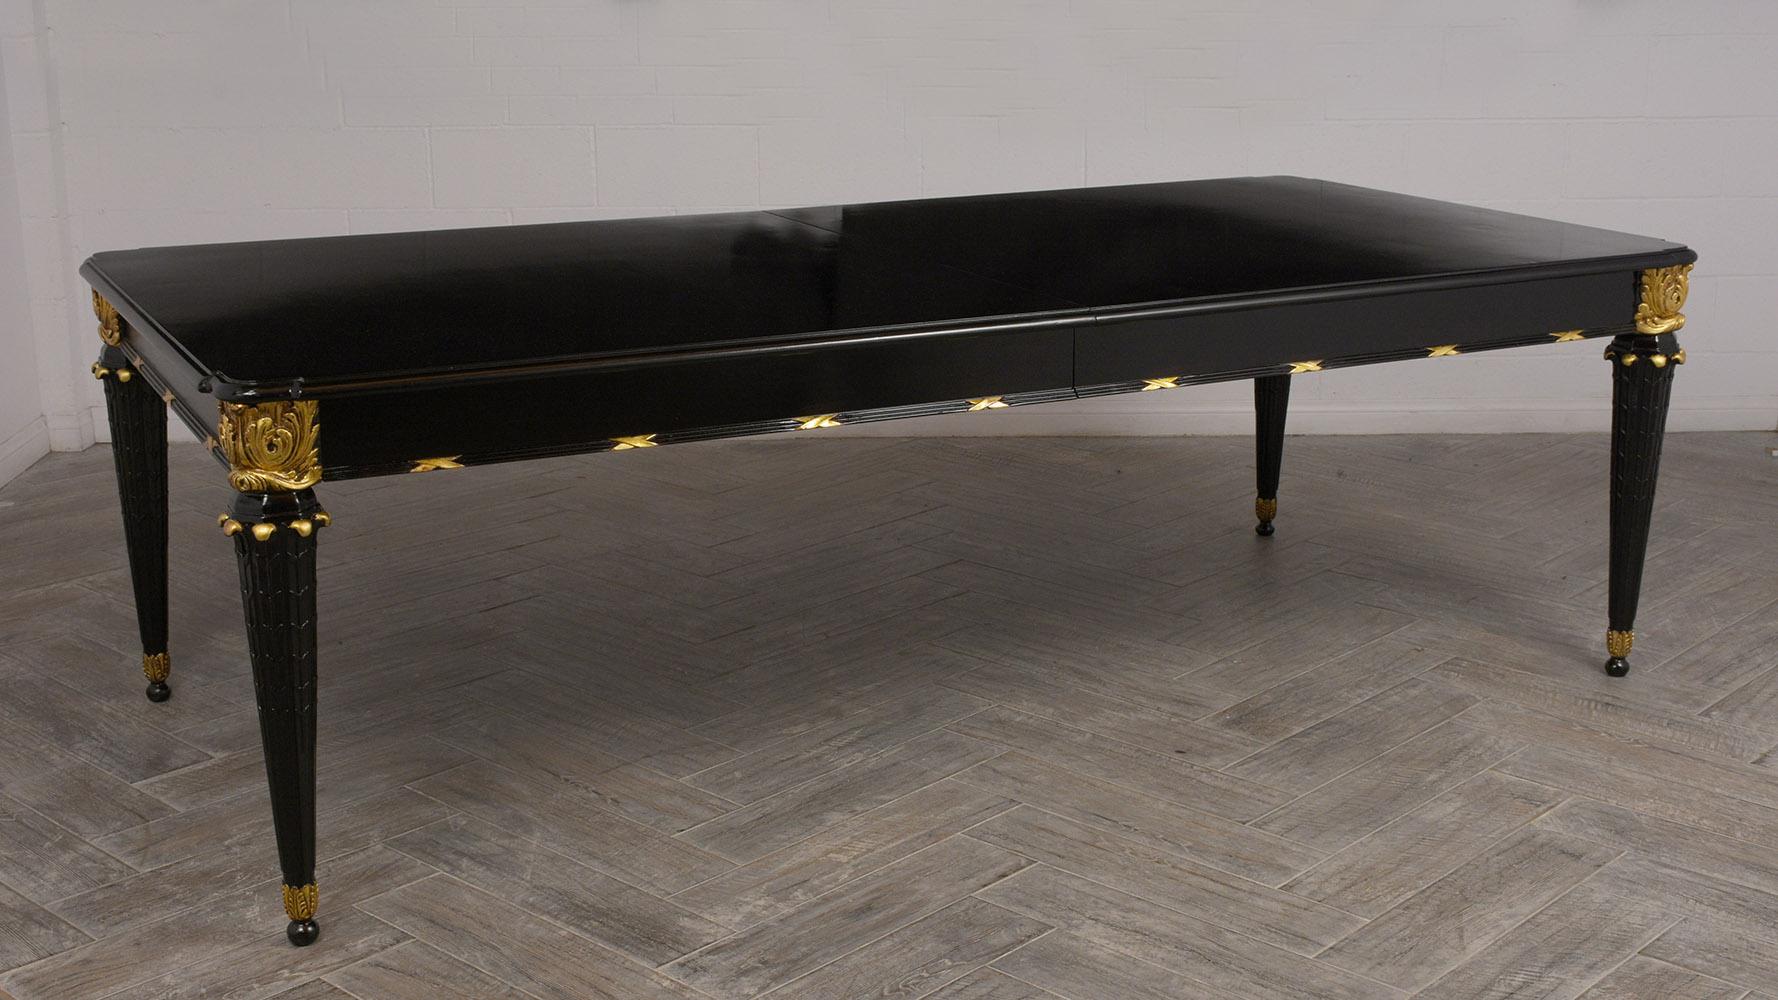 Grand 1950s Ebonized Extendable Dining Room Table in Regency Style 3